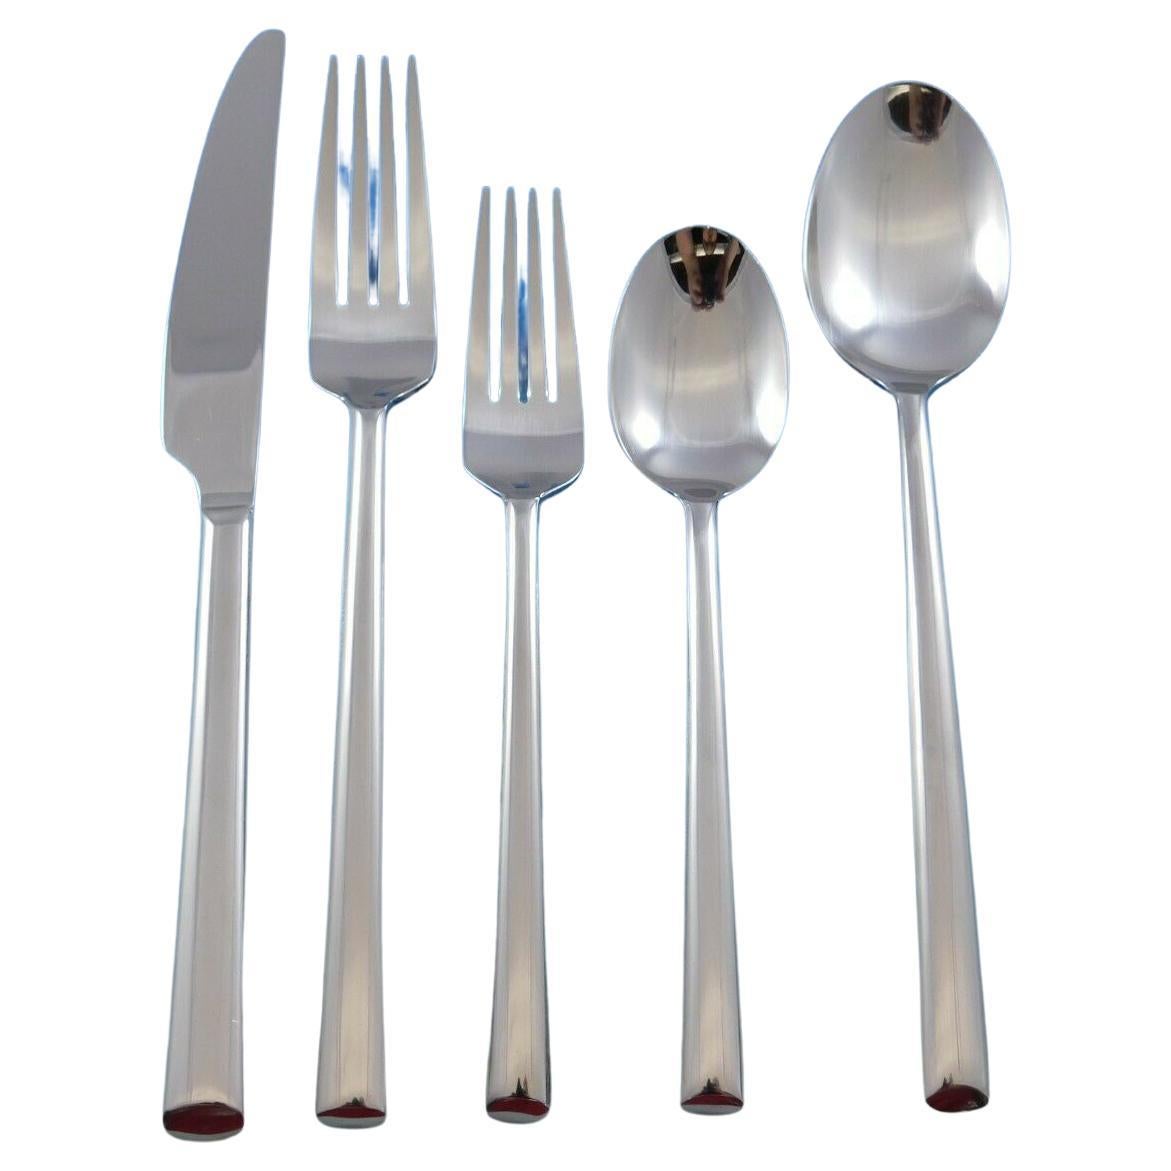 https://a.1stdibscdn.com/risk-by-hampton-forge-stainless-steel-flatware-set-service-8-new-modern-for-sale/f_10224/f_260003021636127505816/f_26000302_1636127506052_bg_processed.jpg